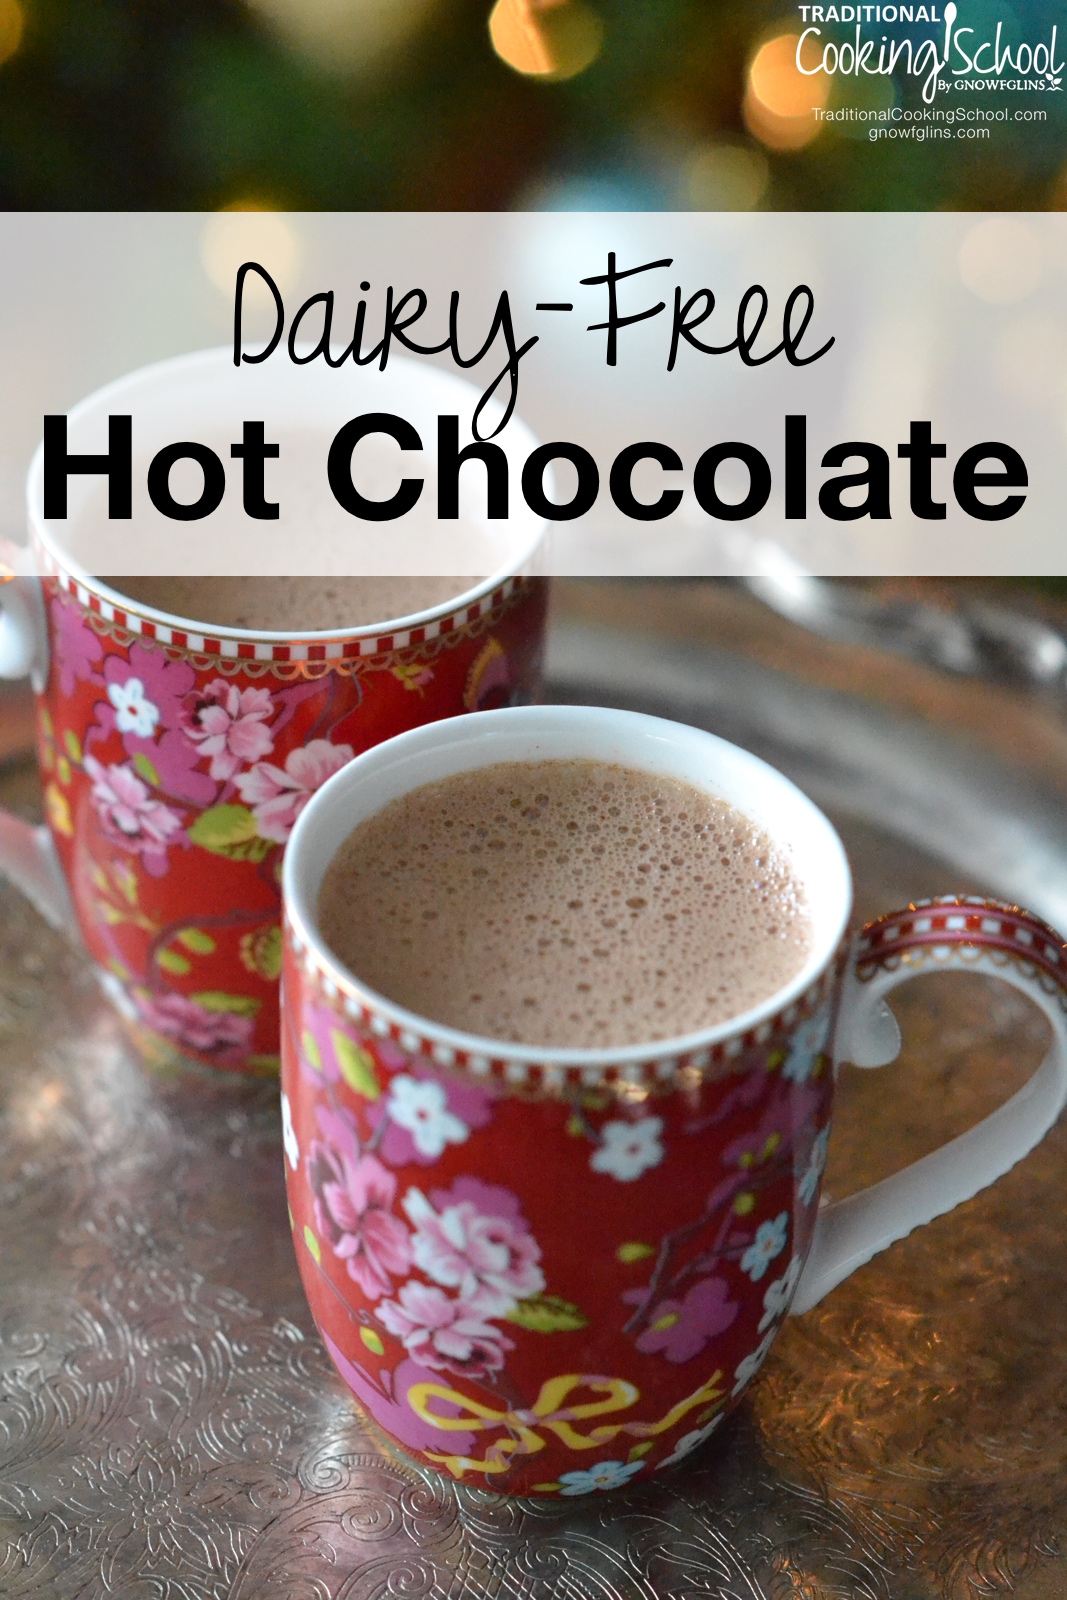 Dairy-Free Hot Chocolate | The perfect warm-up treat when it's cold and wintry outside? A cup of hot chocolate, of course! Unfortunately, if you're staying away from dairy, store bought mixes usually contain it -- along with a host of other unhealthy ingredients. The good news? It's super easy to make dairy-free hot chocolate! | TraditionalCookingSchool.com